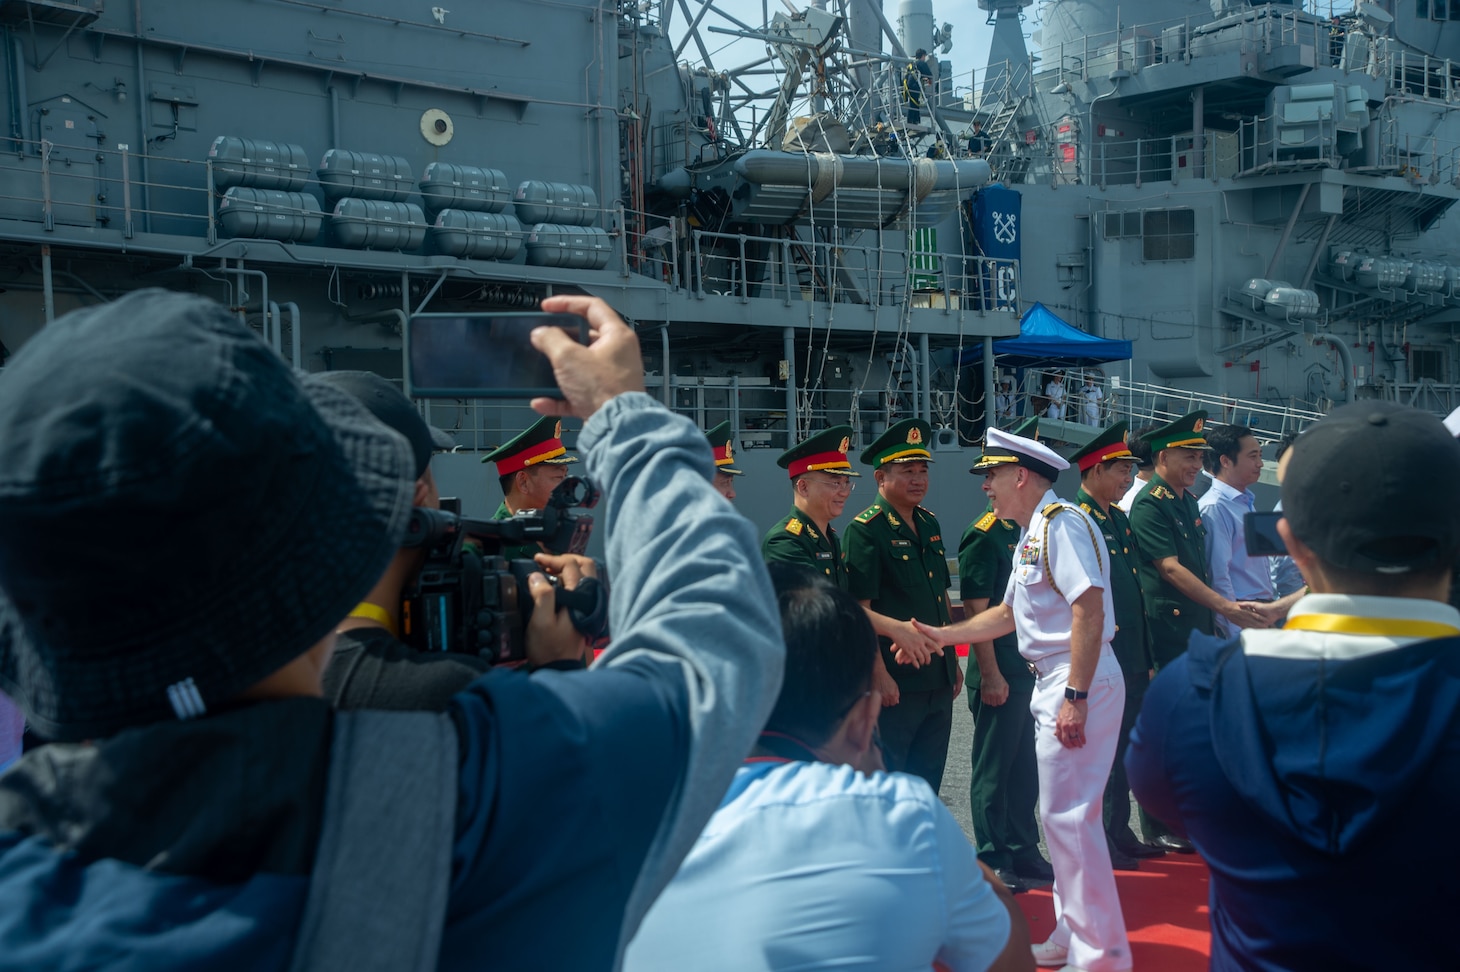 DA NANG, Vietnam (June 25, 2023) – Capt. Bill Johnson, Chief of Staff of Commander, Task Force 70/Carrier Strike Group 5, shakes hands with a Vietnamese military officer during an arrival ceremony for the U.S. Navy’s only forward-deployed carrier, USS Ronald Regan (CVN 76), carrier strike group (CSG) in Da Nang, Vietnam June 25, 2023. This marks Ronald Reagan’s first visit to the country since diplomatic relations were re-established. Ronald Reagan CSG is forward-deployed to the 7th Fleet area of operation in support of a free and open Indo-Pacific. (U.S. navy photo by Mass Communication Specialist 2nd Class Askia Collins)